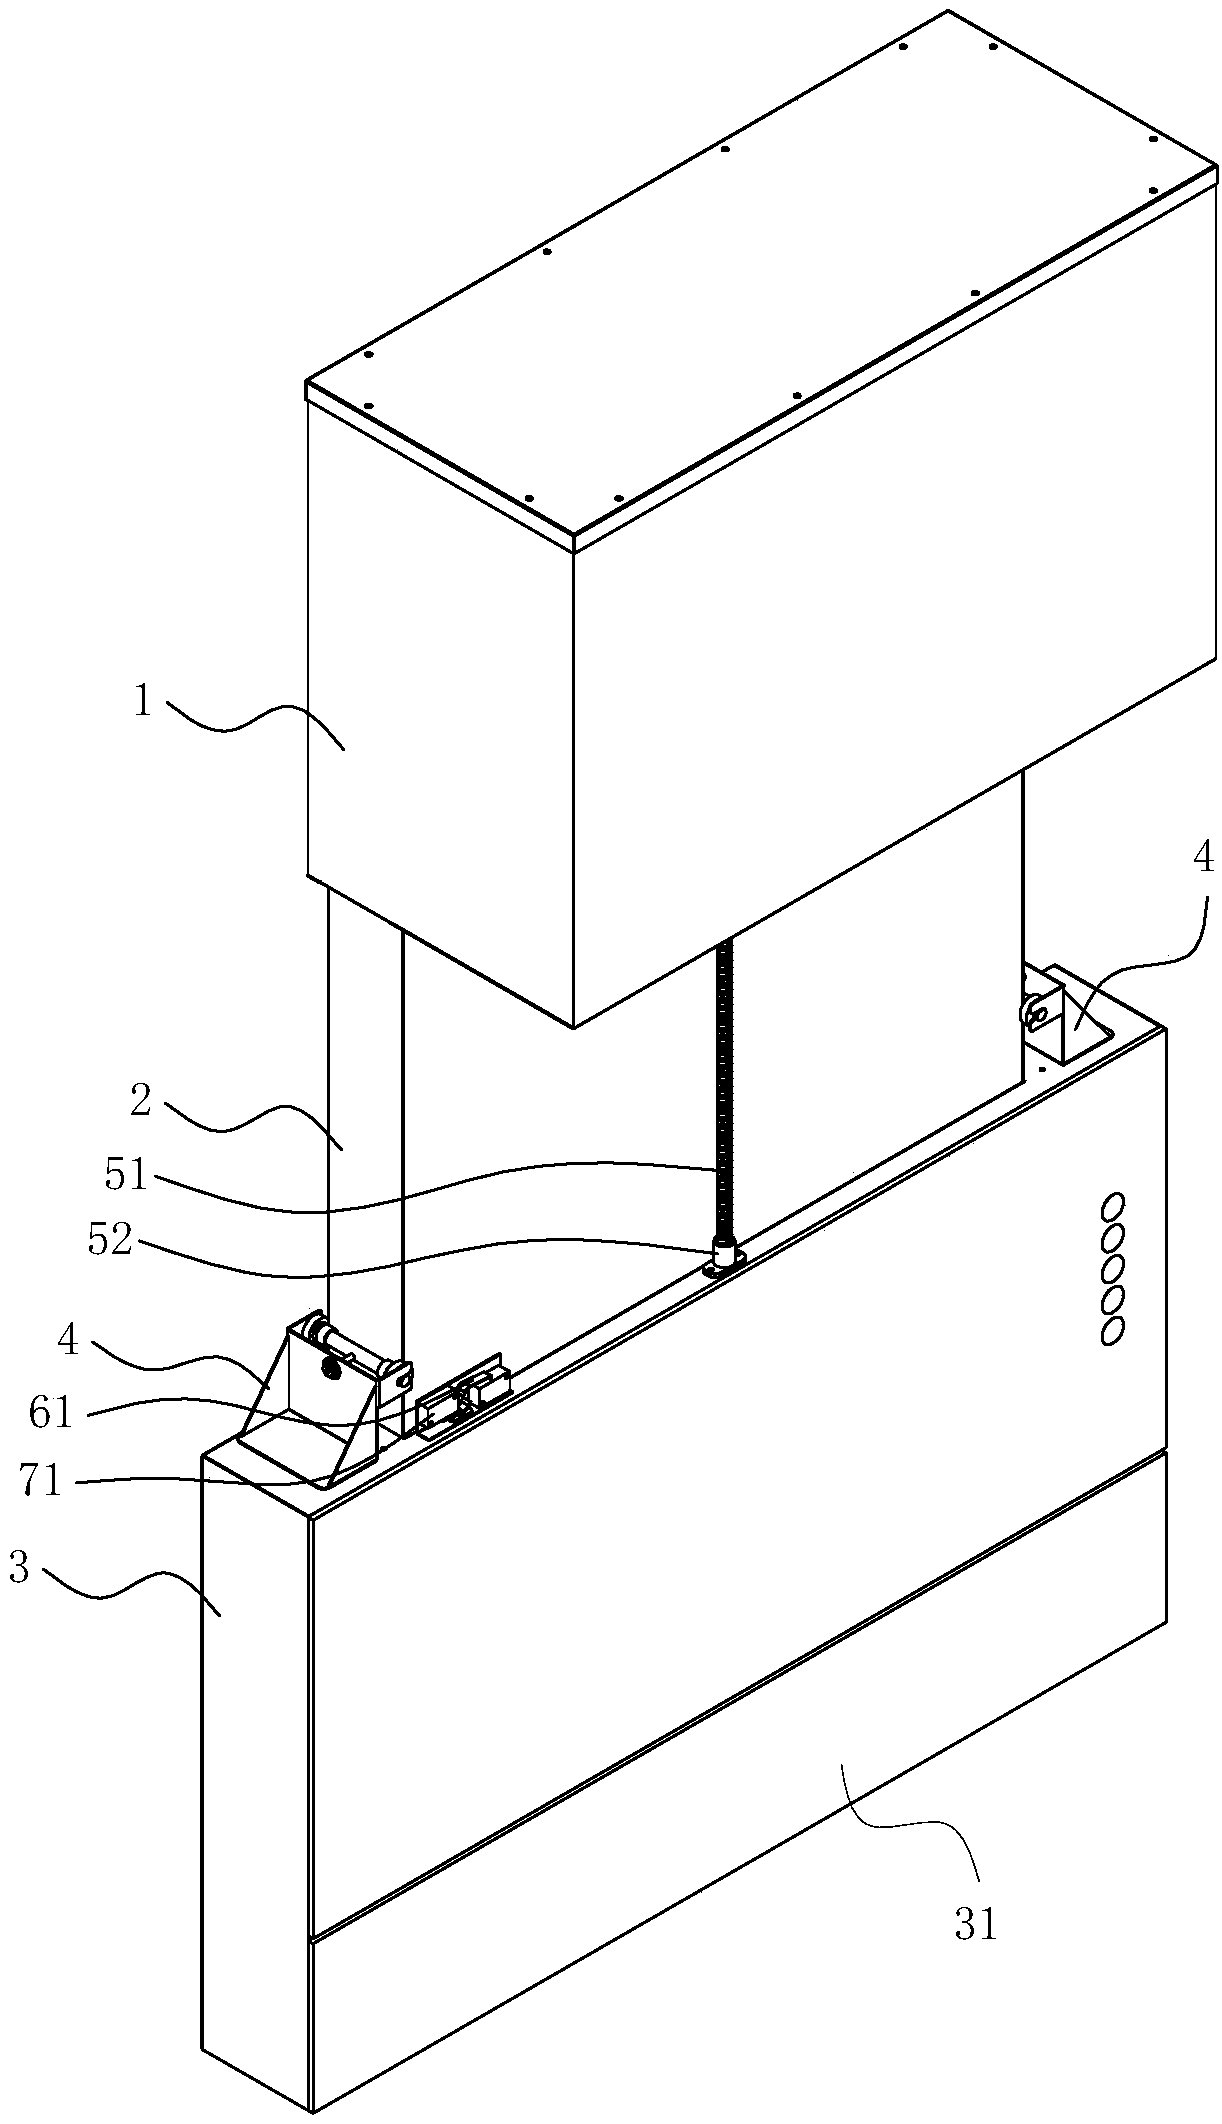 Exhaust hood with smoke collecting cavity capable of ascending and descending